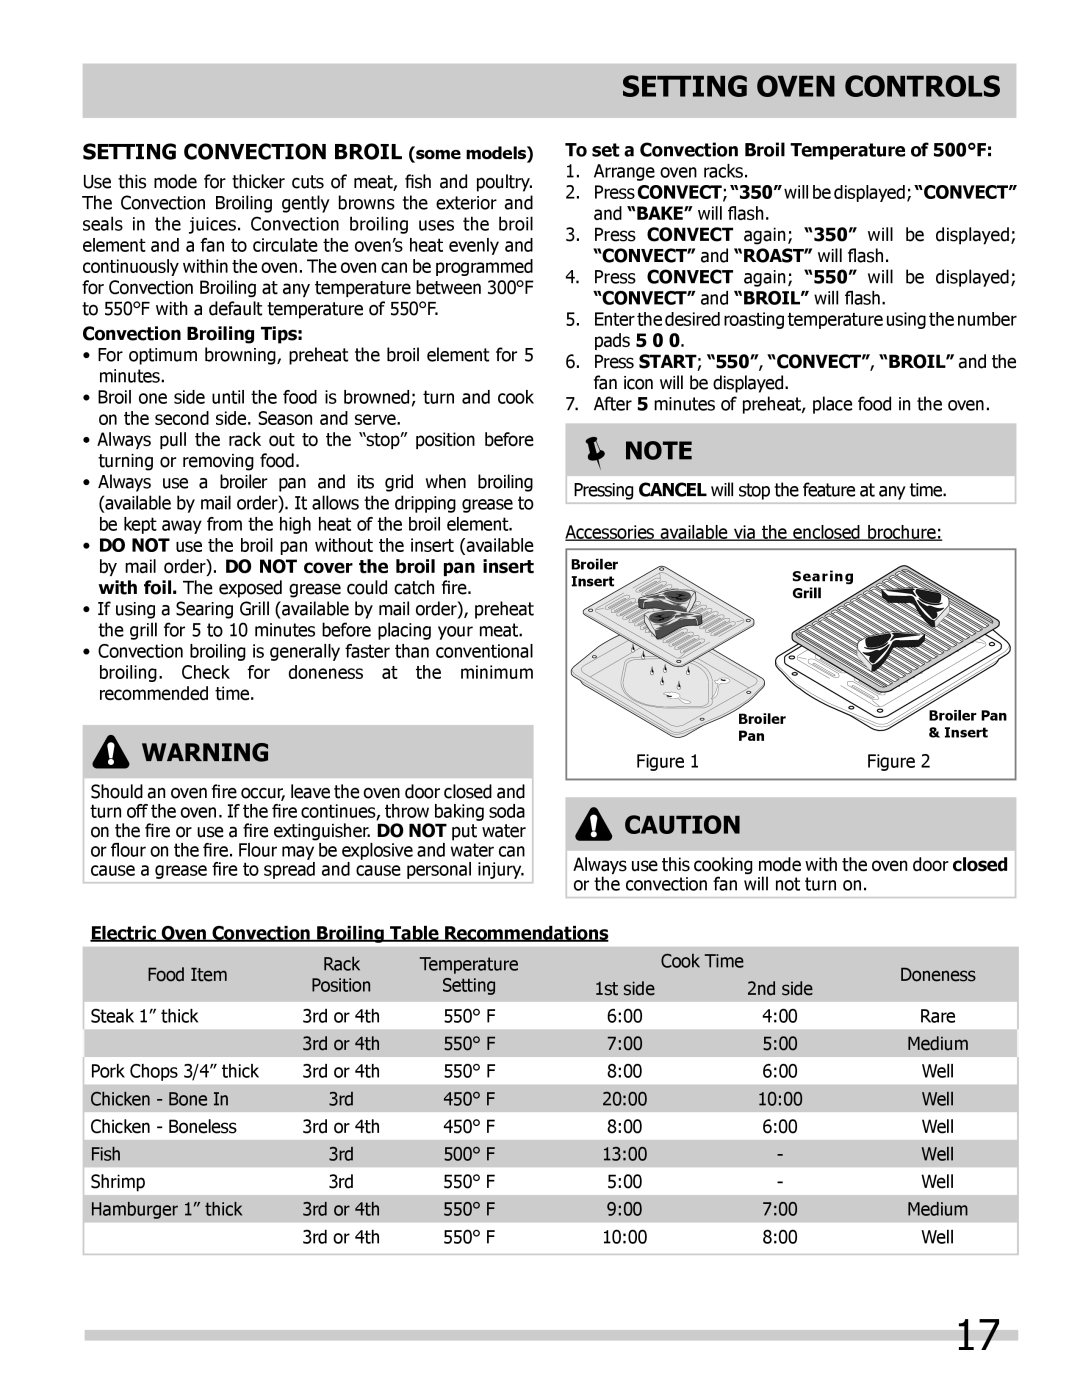 Frigidaire FPET2785KF manual SETTING CONVECTION BROIL some models, Convection Broiling Tips, Setting Oven Controls,  Note 